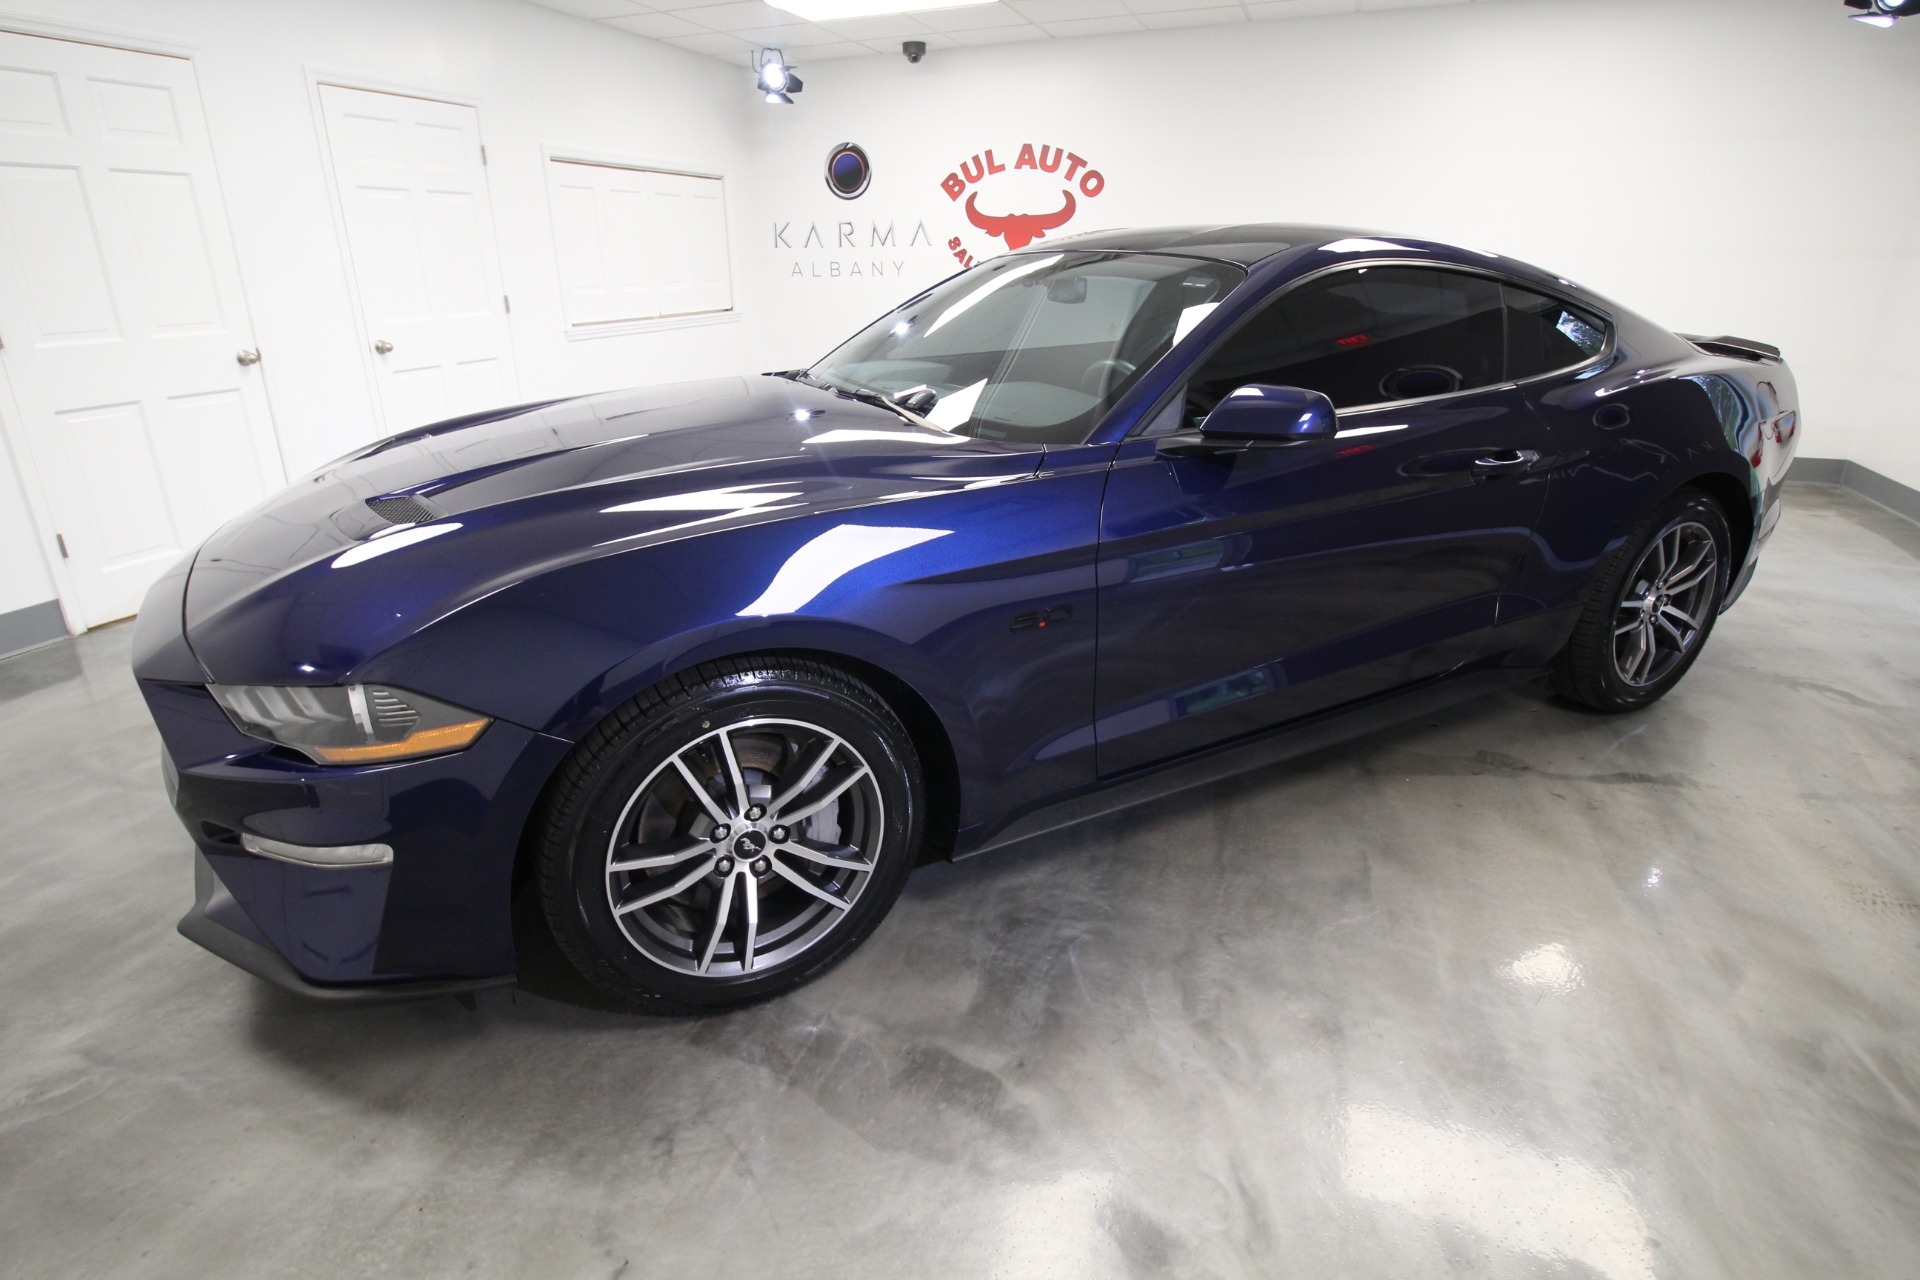 Used 2018 Kona Blue Metallic Ford Mustang GT Coupe Standard Transmission | Albany, NY